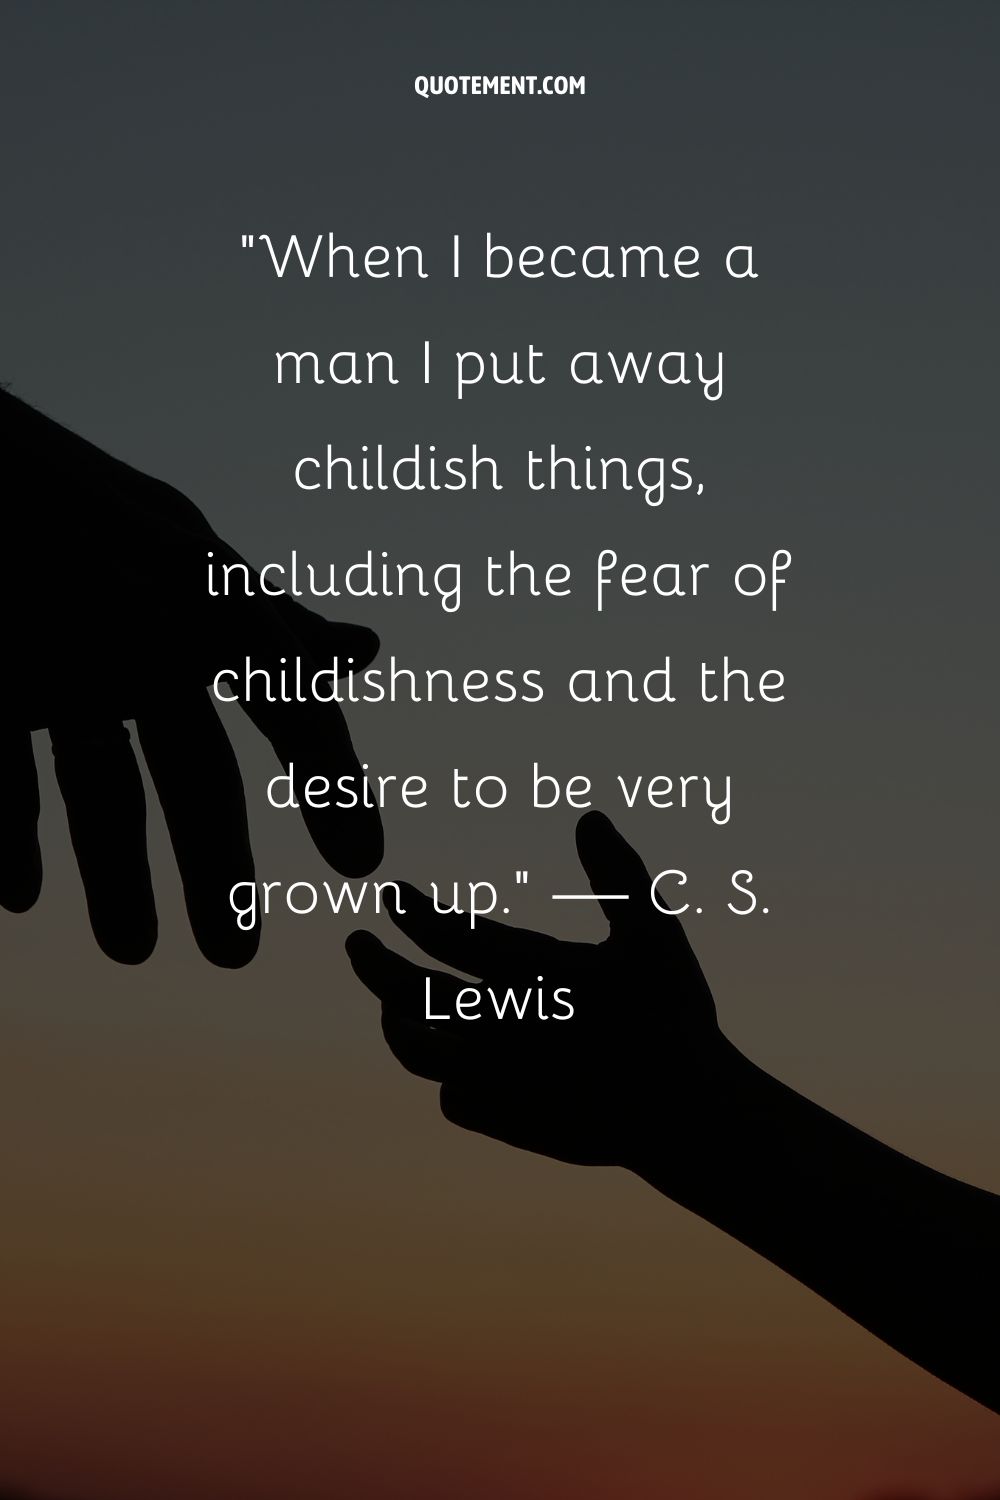 Grown hand reaches for child's representing a grown-up quote.